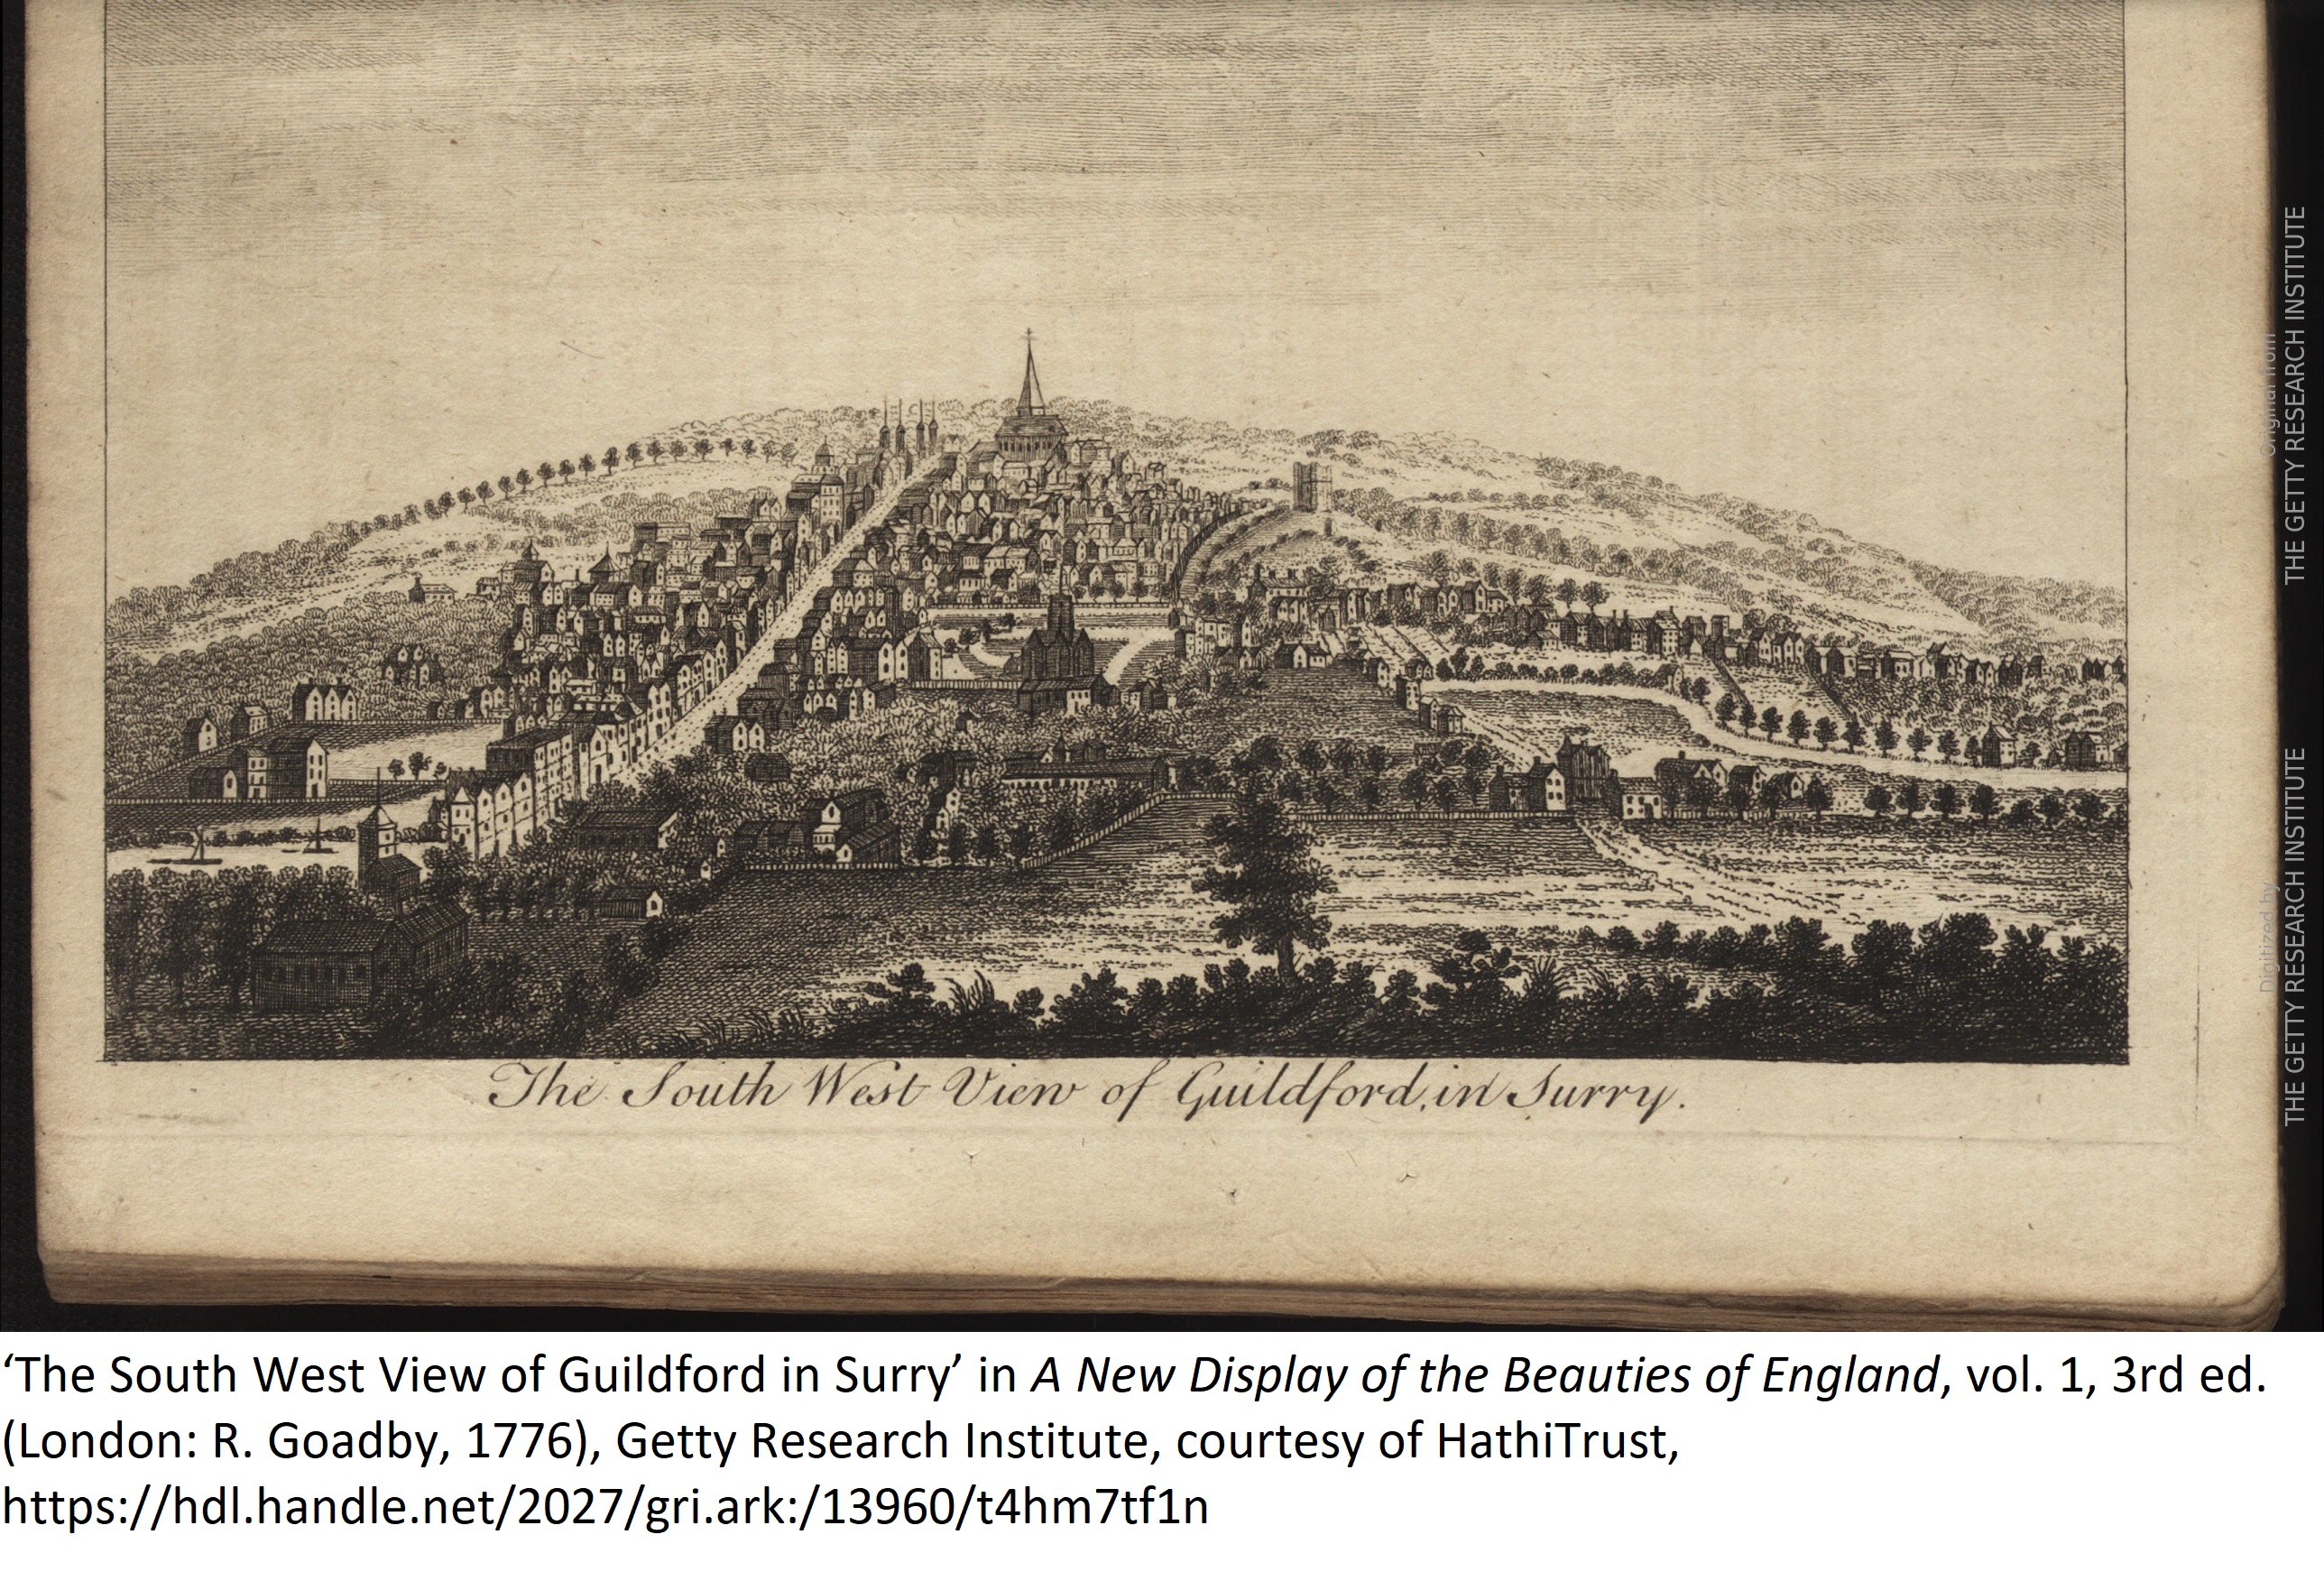 ‘The South West View of Guildford in Surry’ in A New Display of the Beauties of England, vol. 1, 3rd ed. (London: R. Goadby, 1776), Getty Research Institute, courtesy of HathiTrust, https://hdl.handle.net/2027/gri.ark:/13960/t4hm7tf1n 